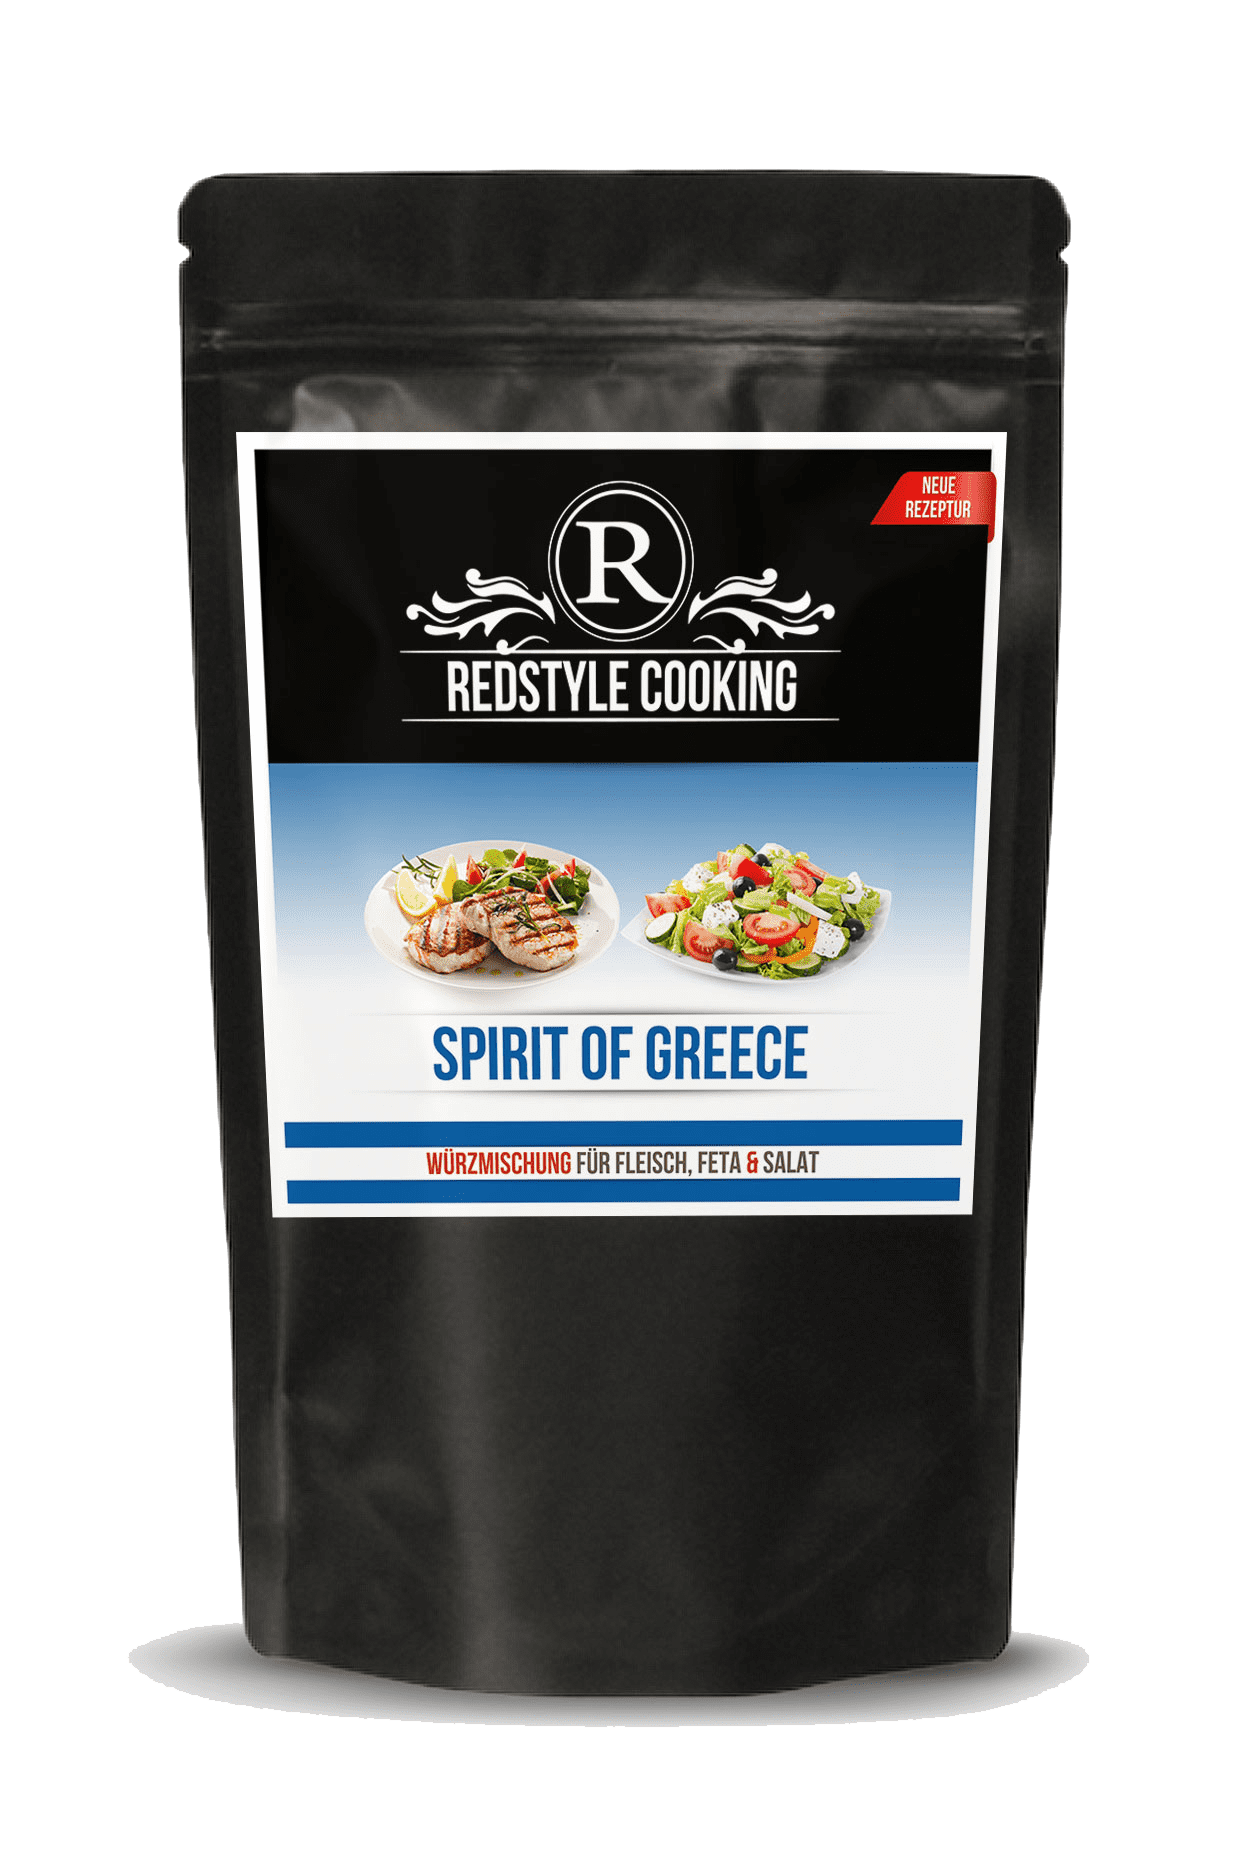 Spirit of Greece, Redstyle Cooking